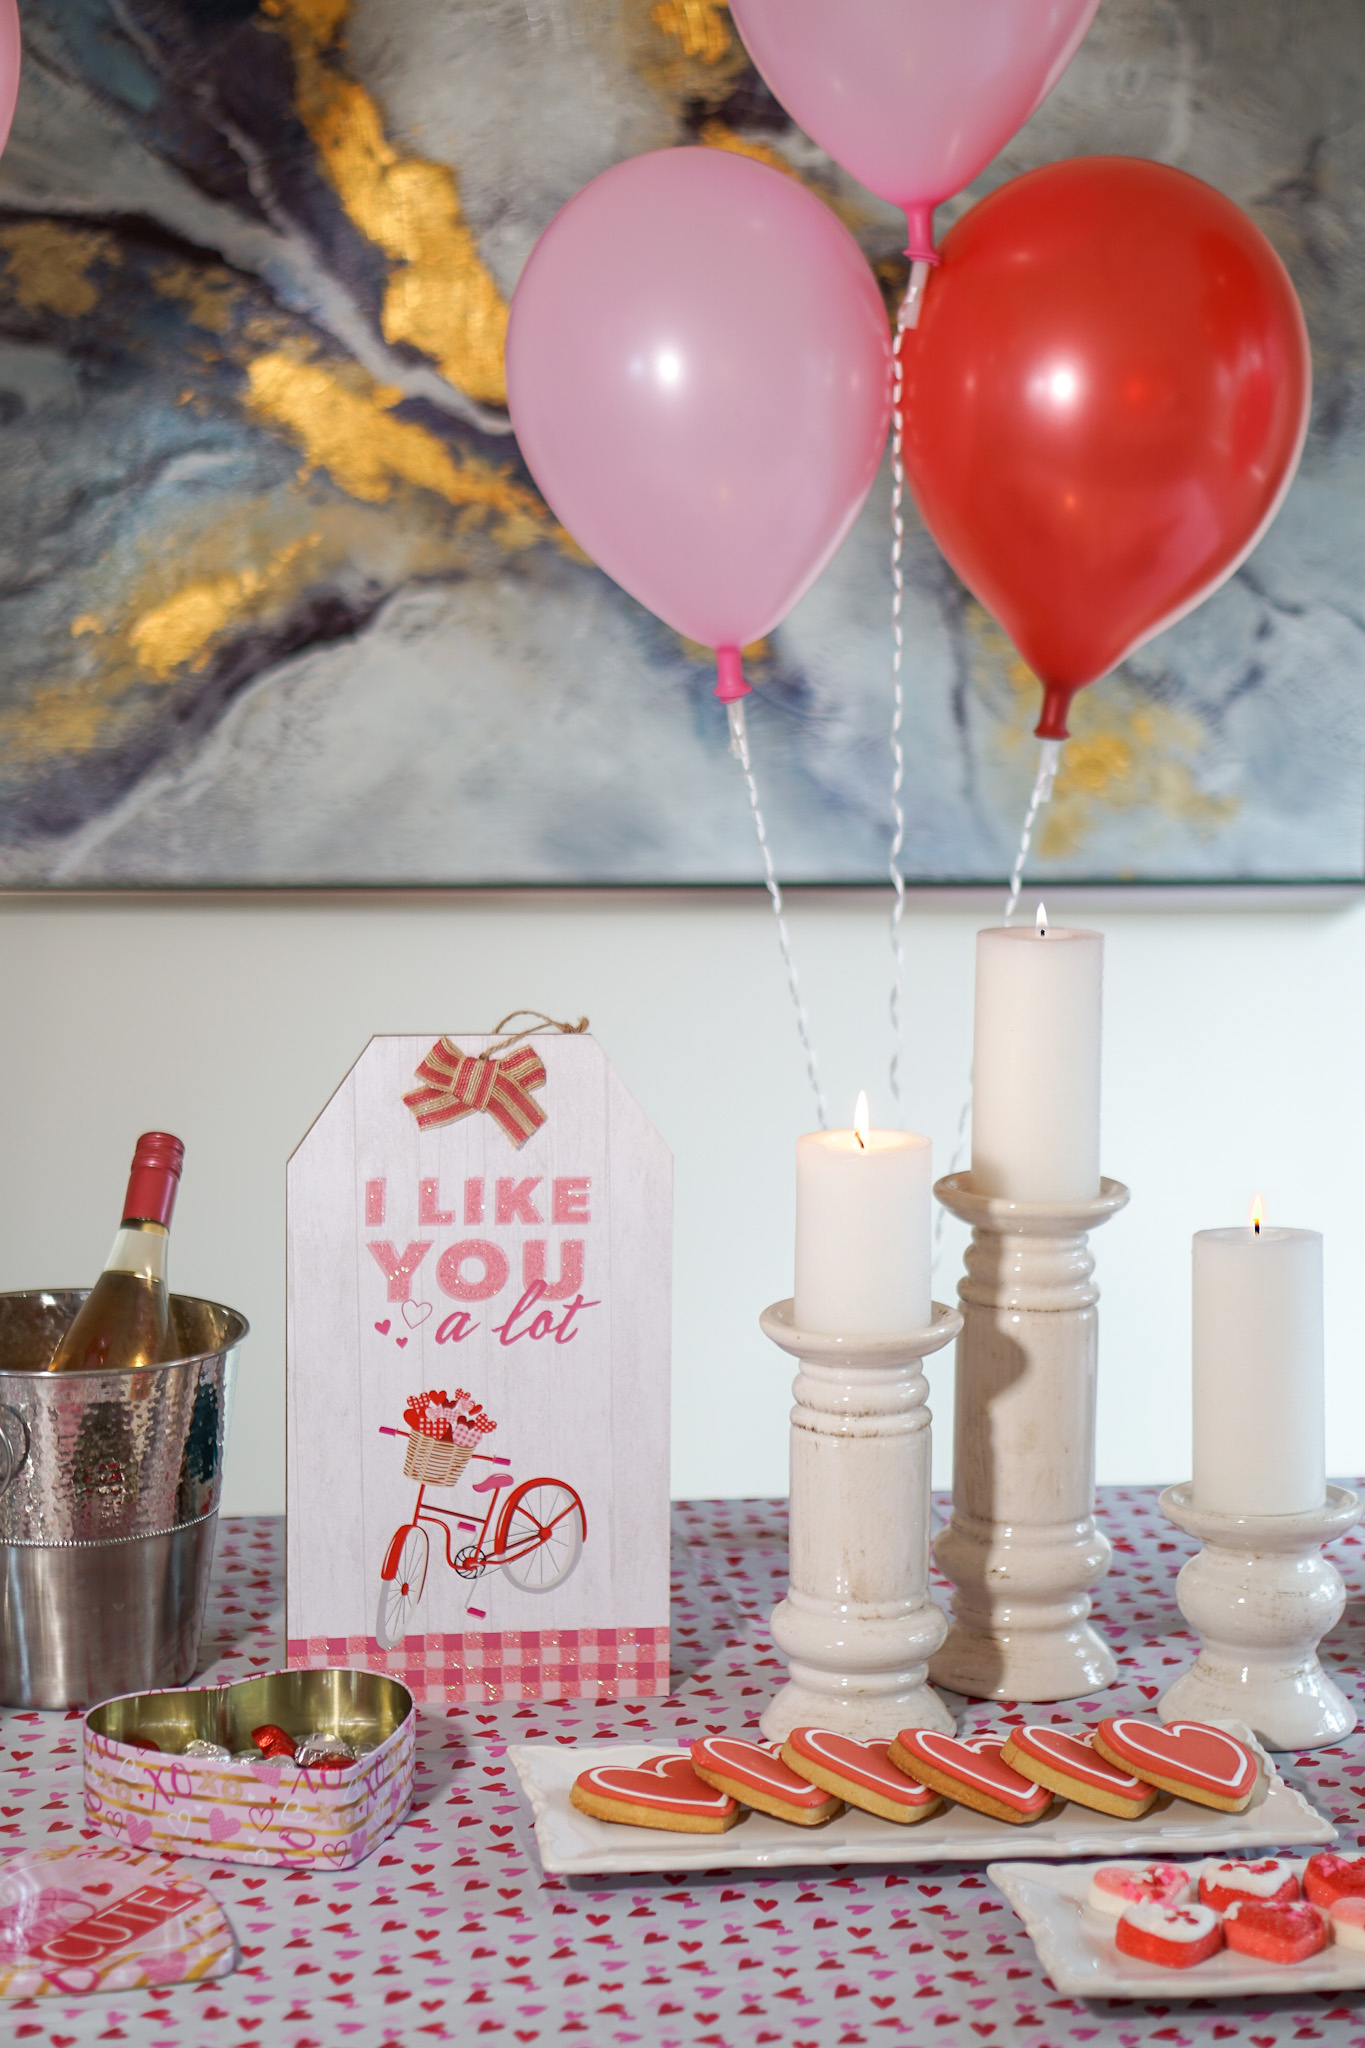 Galentine's Day Extravaganza A Guide To Hosting The Ultimate Celebration with Your Gal Pals